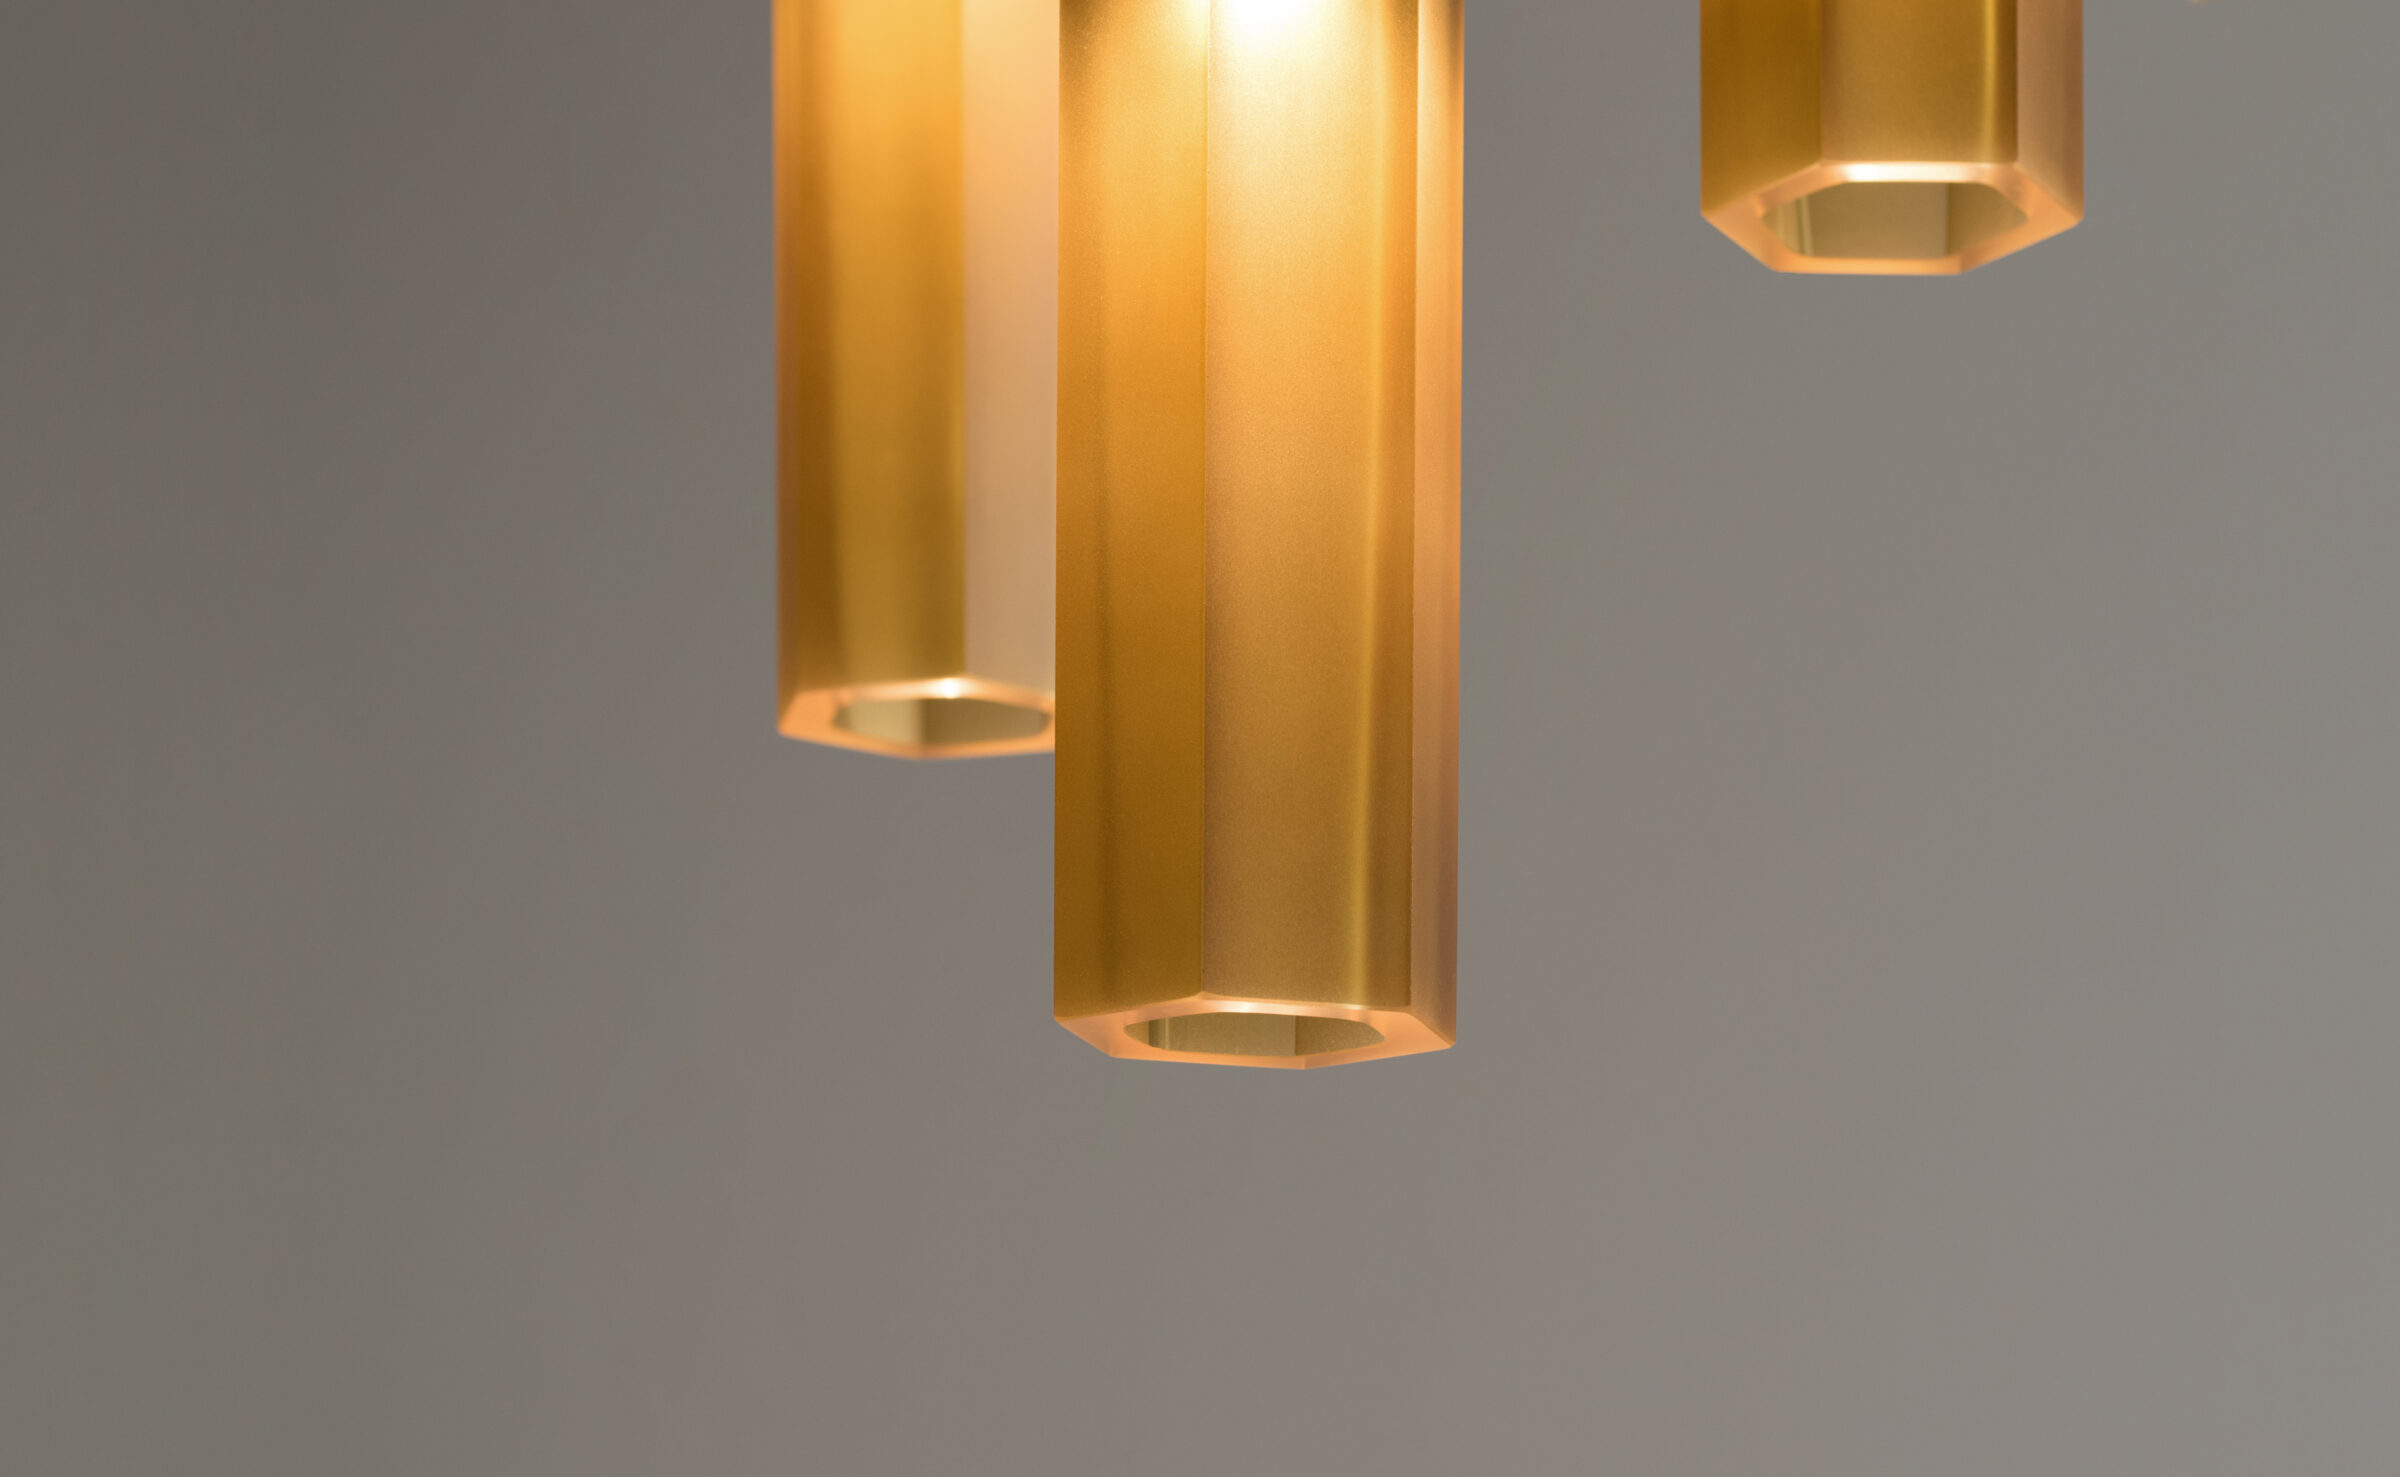 HON hexagonal pendant lamp made of frosted honey-colored glass